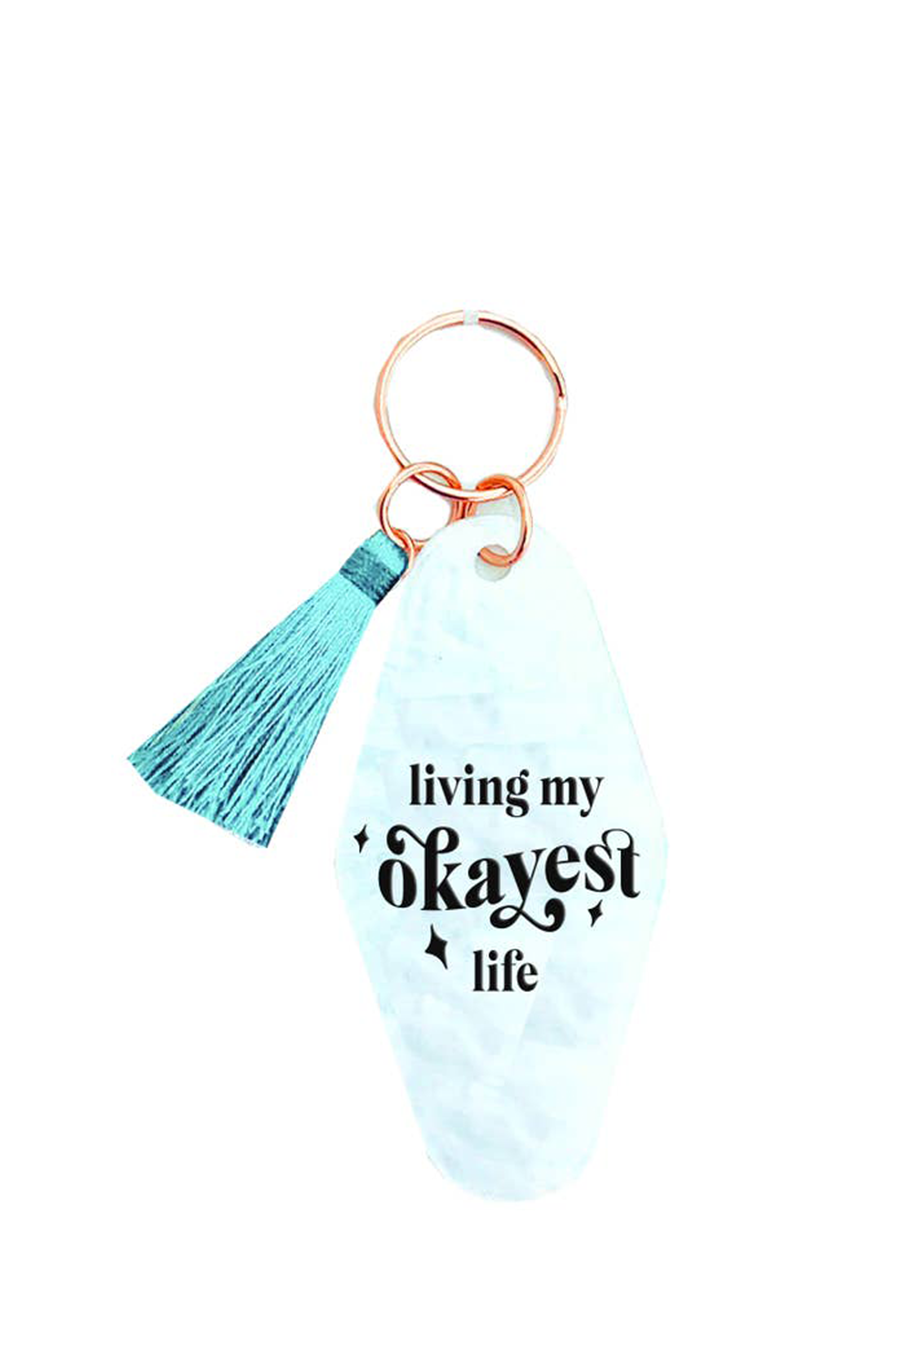 Living My Okayest Life Keychain - Main Image Number 1 of 1